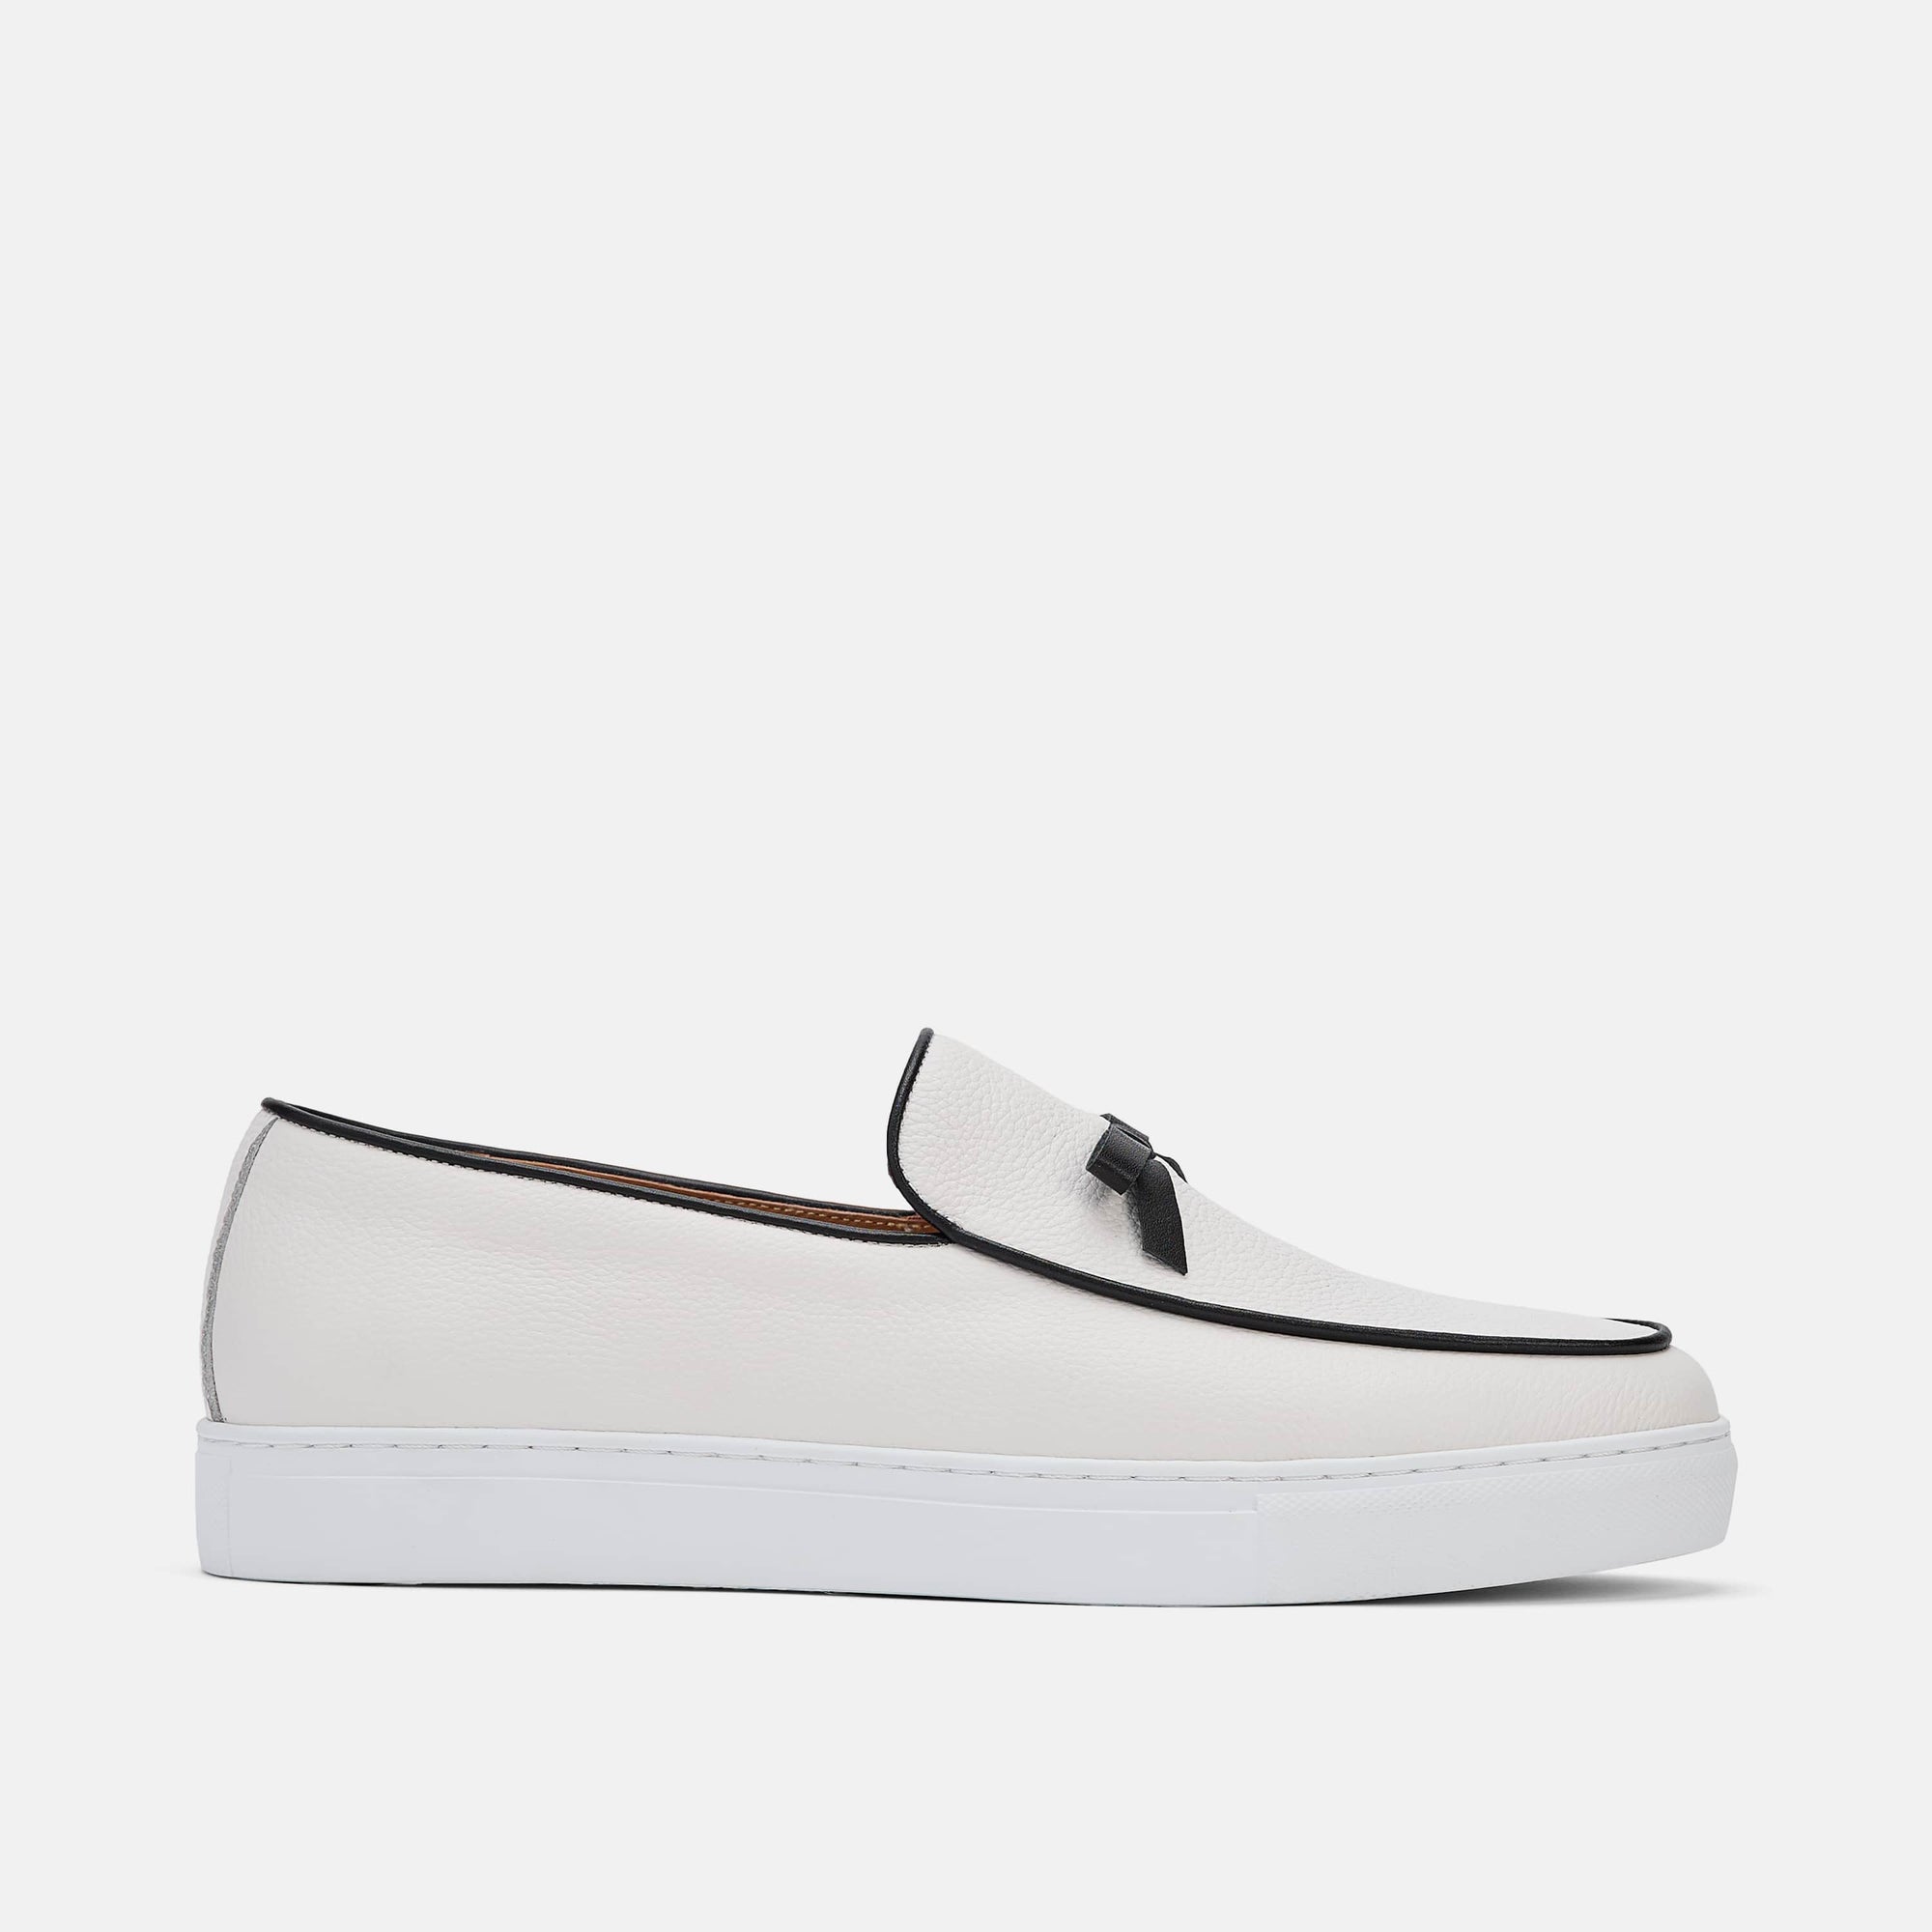 Odell White Suede Belgian Loafer Sneakers